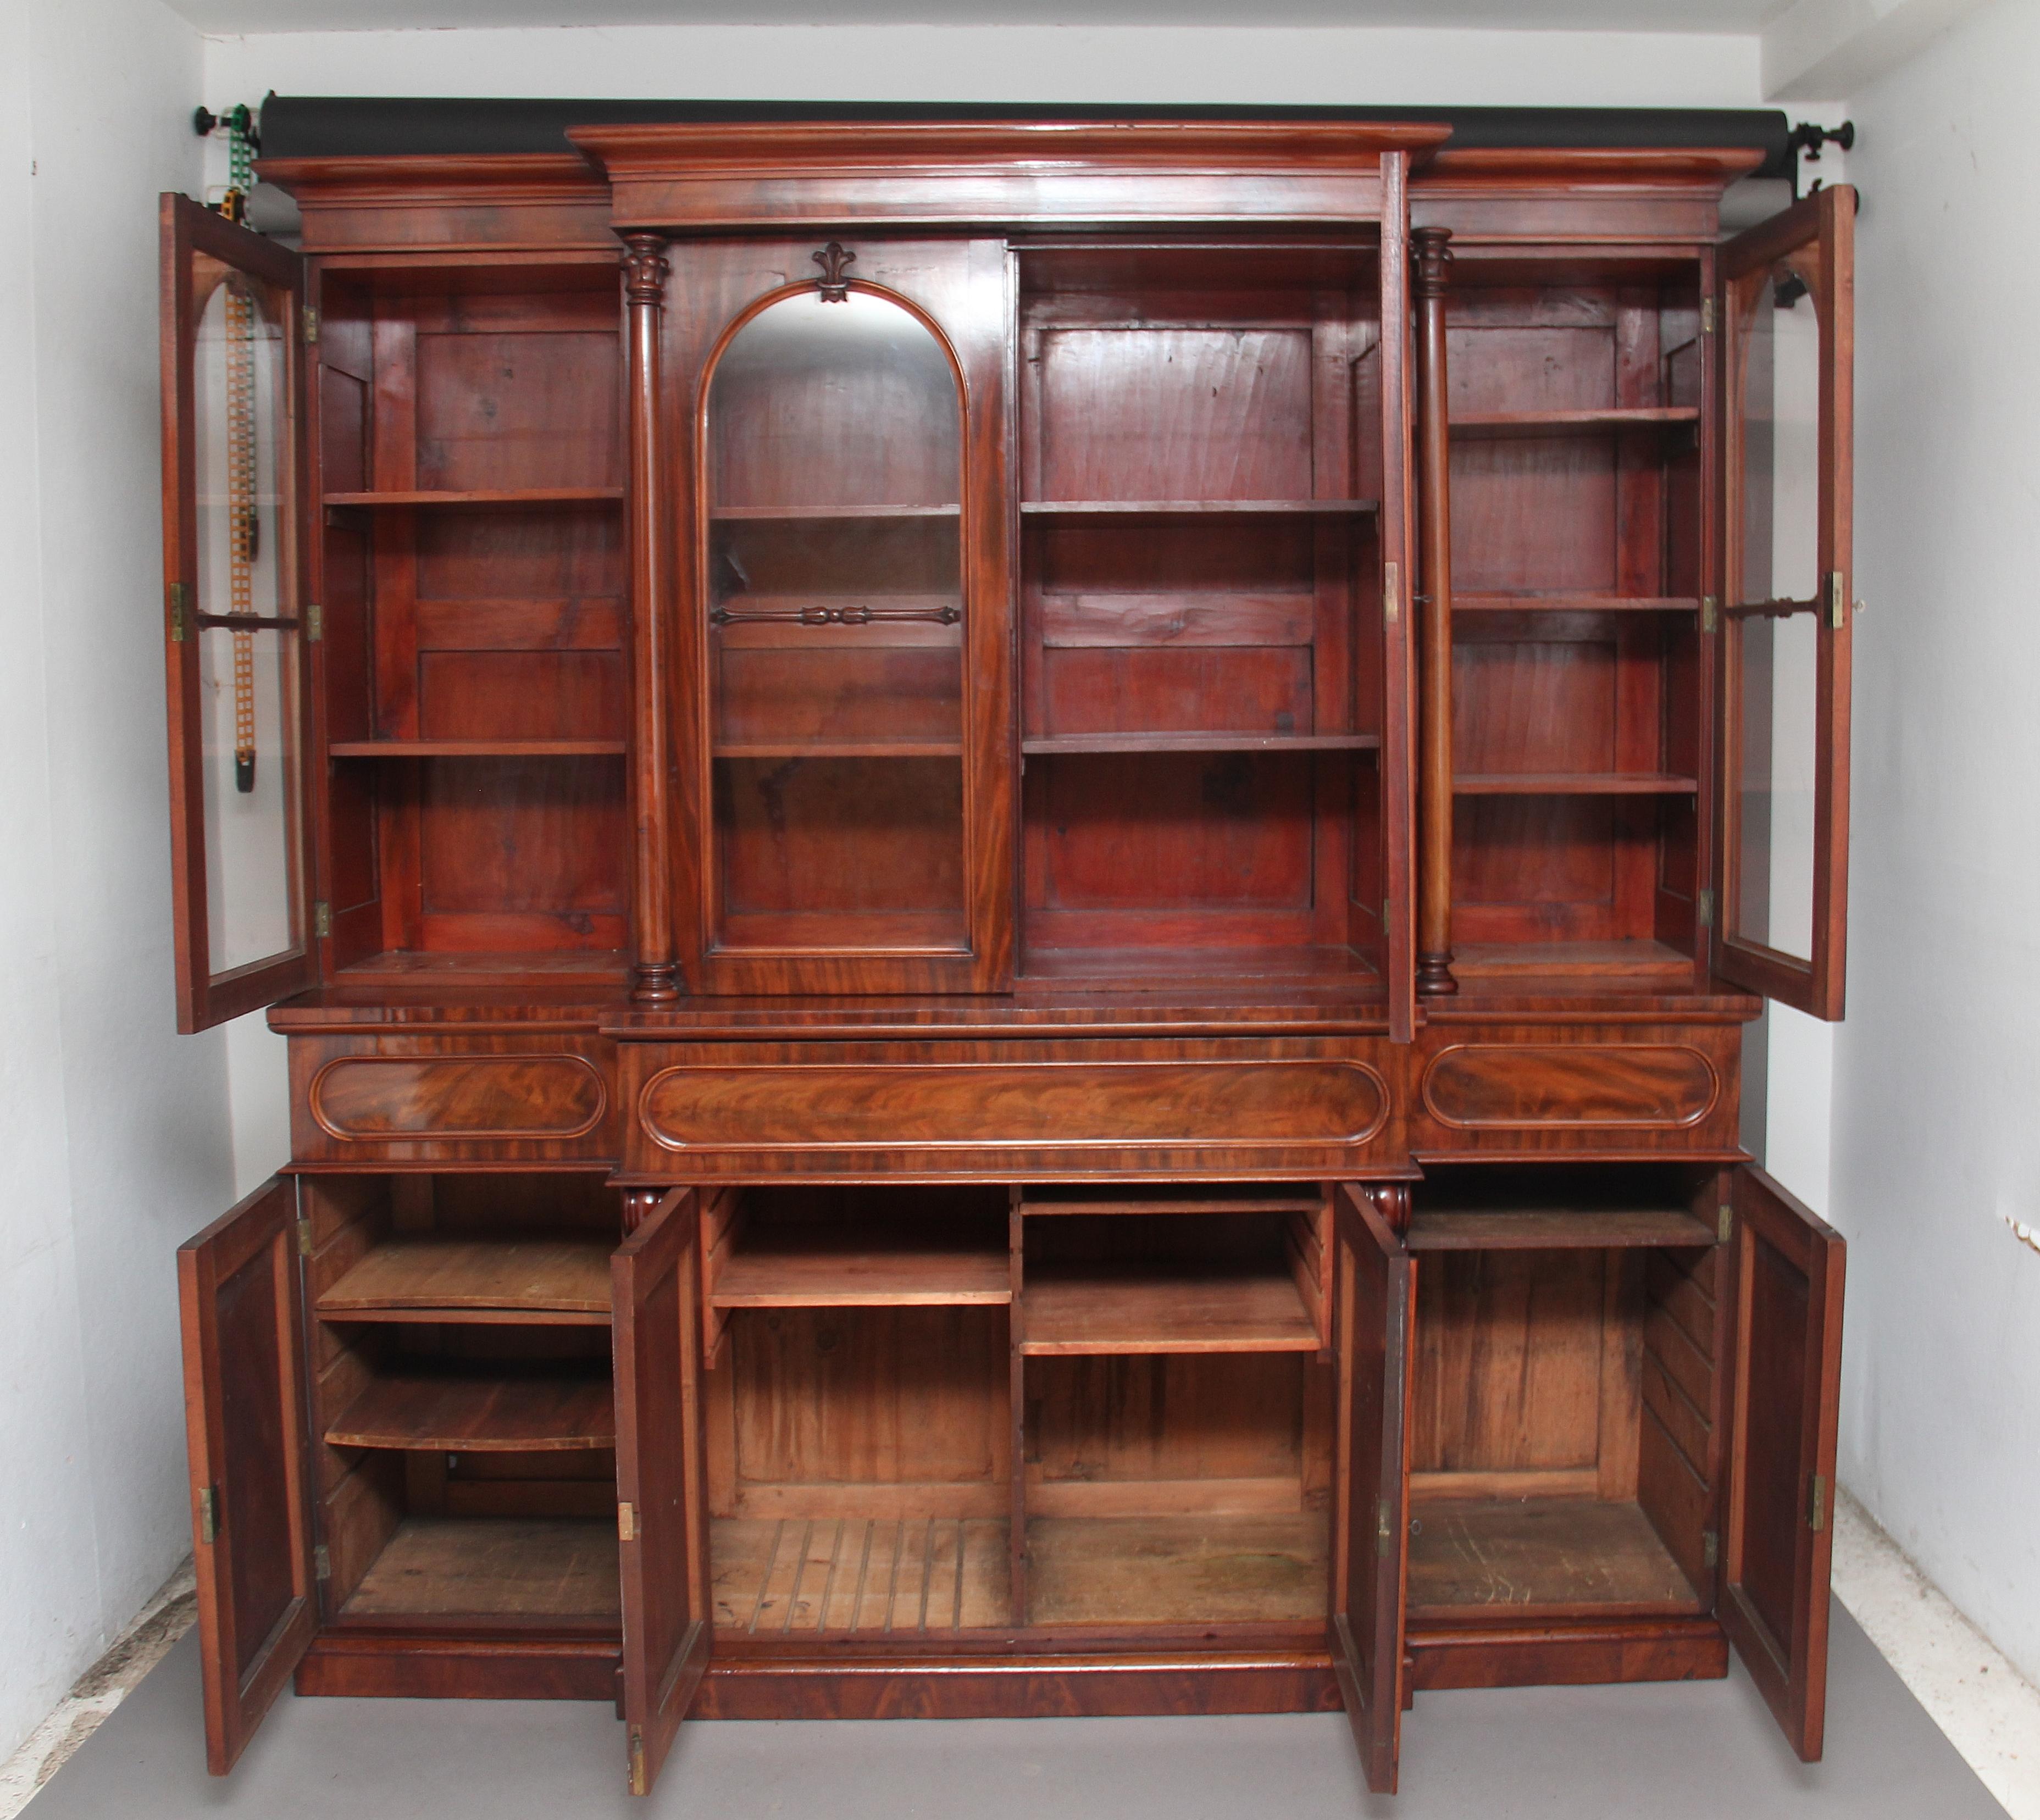 Early 19th century flame mahogany breakfront bookcase, the molded cornice above four arched glazed doors, with carved decoration at the top of each door and a turned and carved spindle at the centre, the middle doors flanked either side by